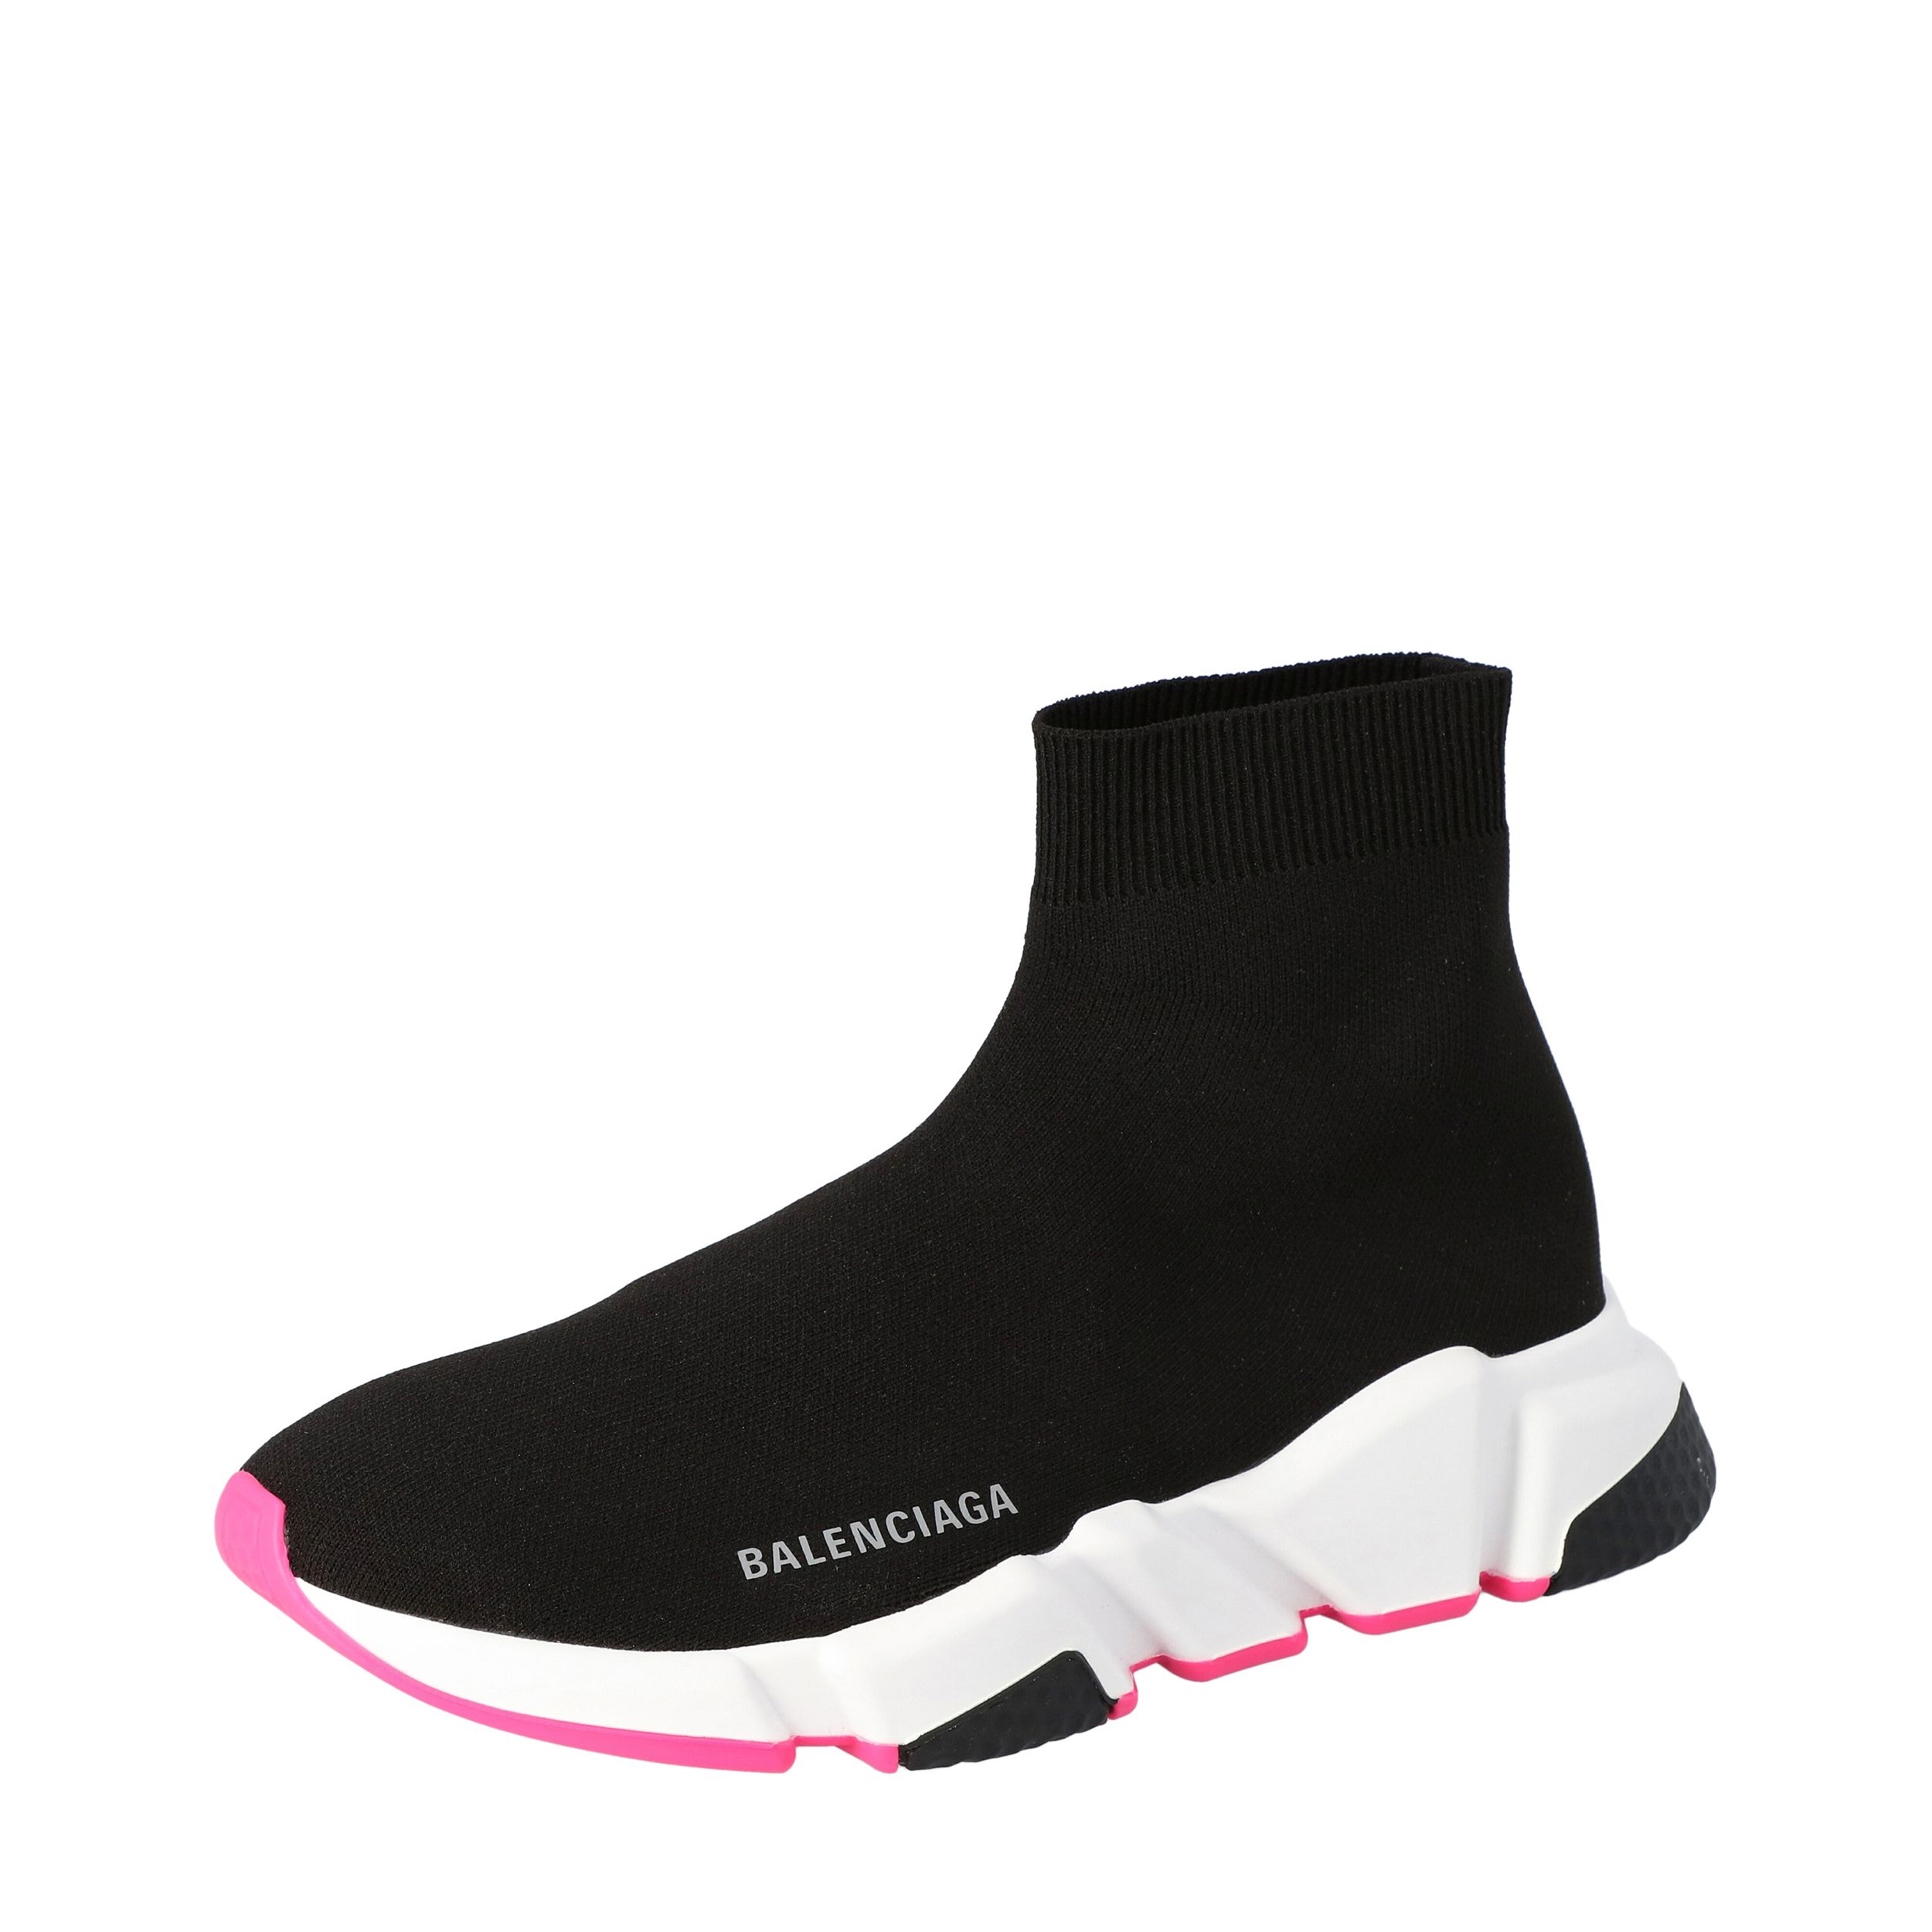 Balenciaga Black/Pink Knit Speed High Top Sneakers Size 35